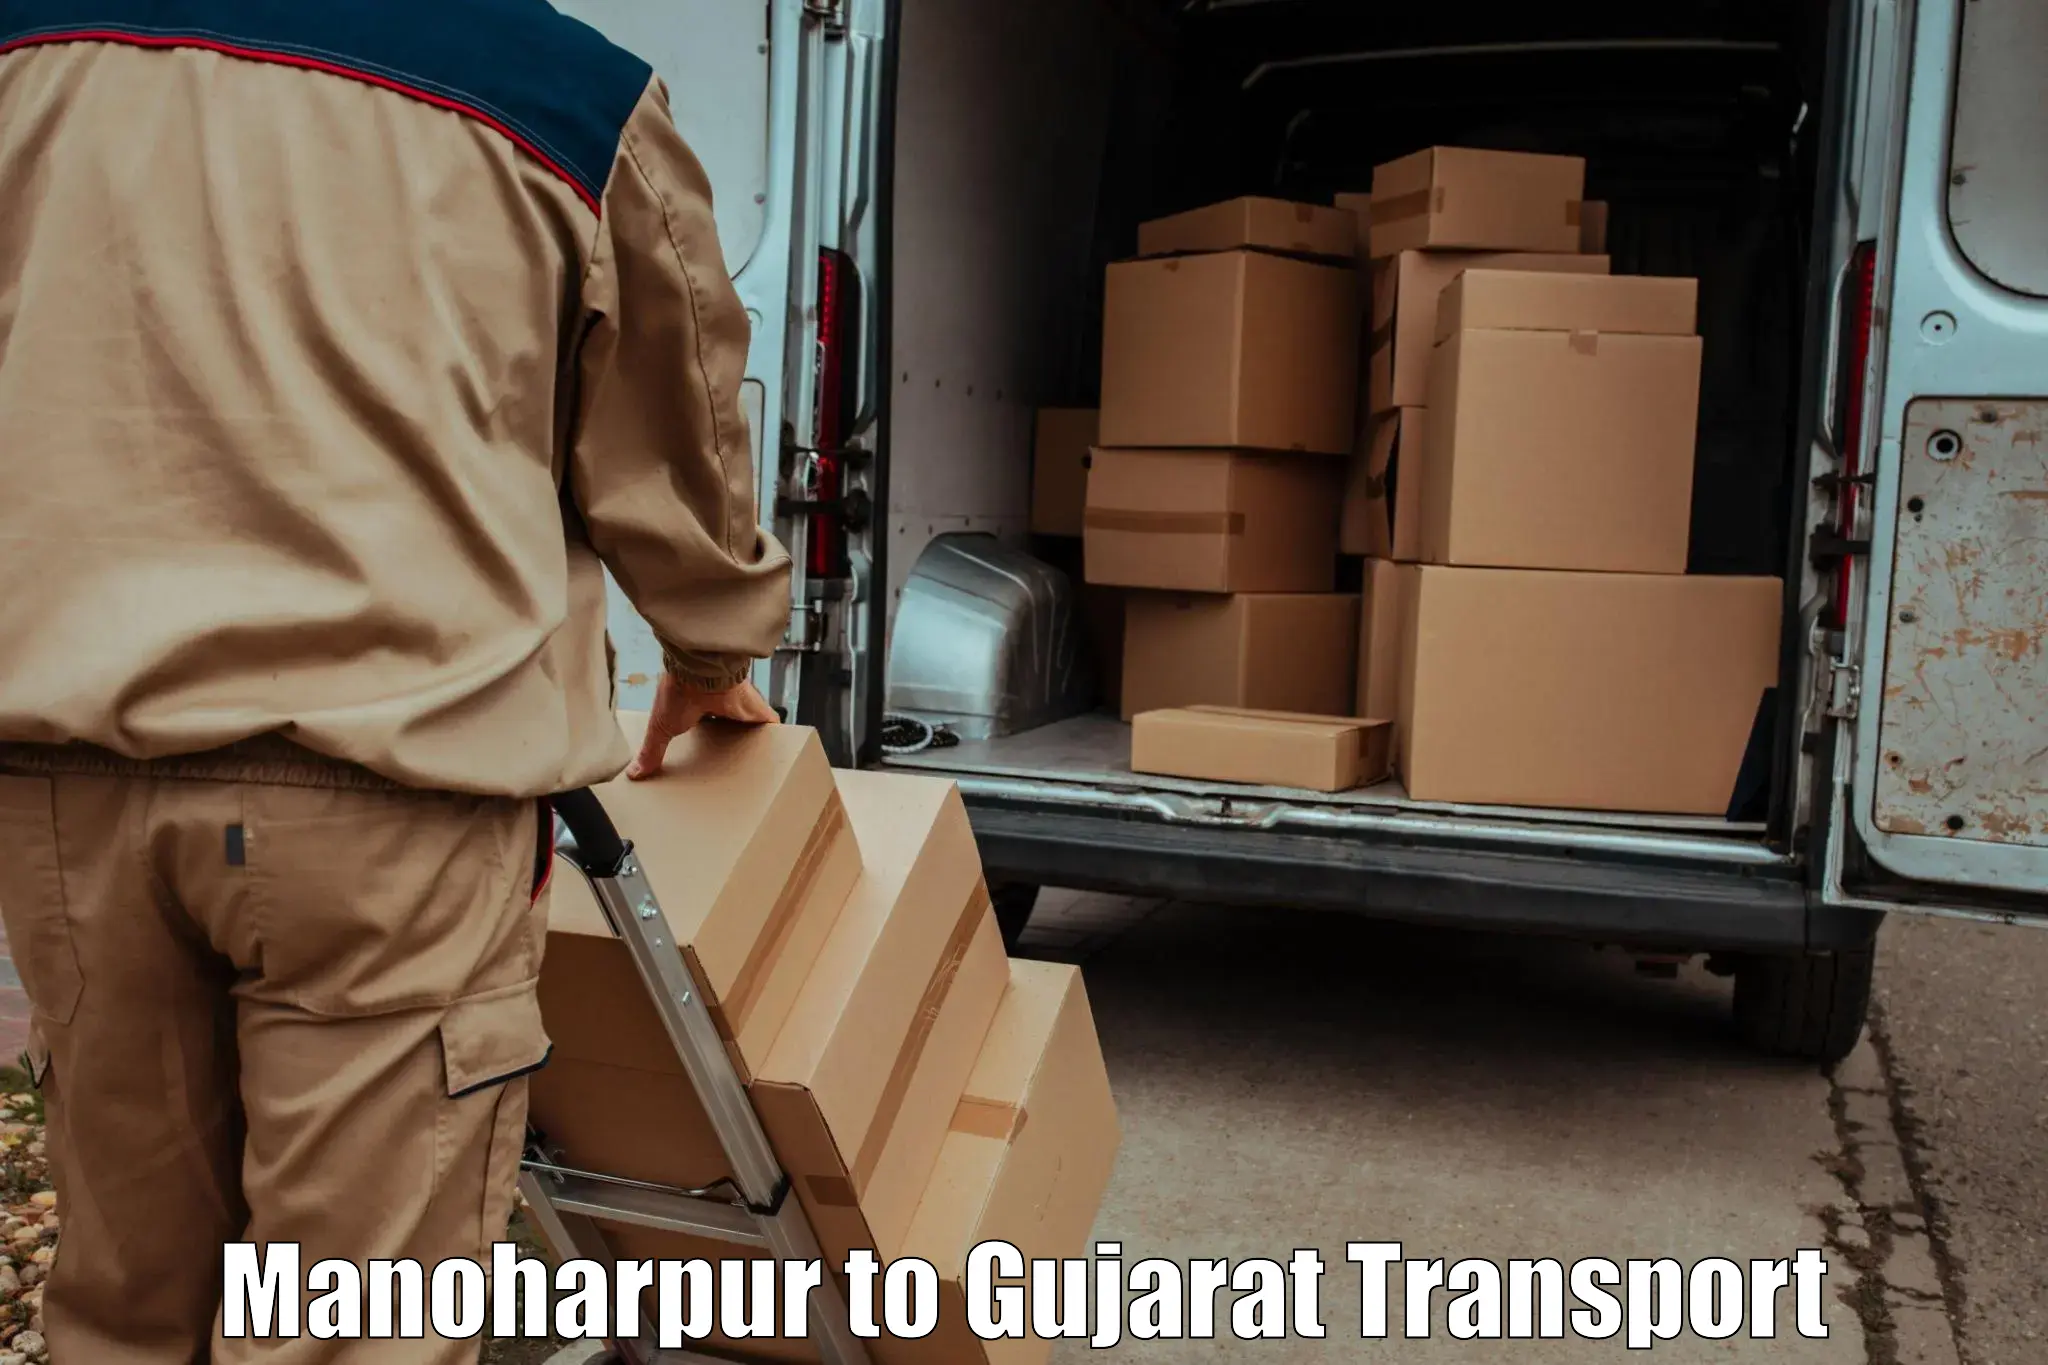 Online transport booking Manoharpur to Ahmedabad